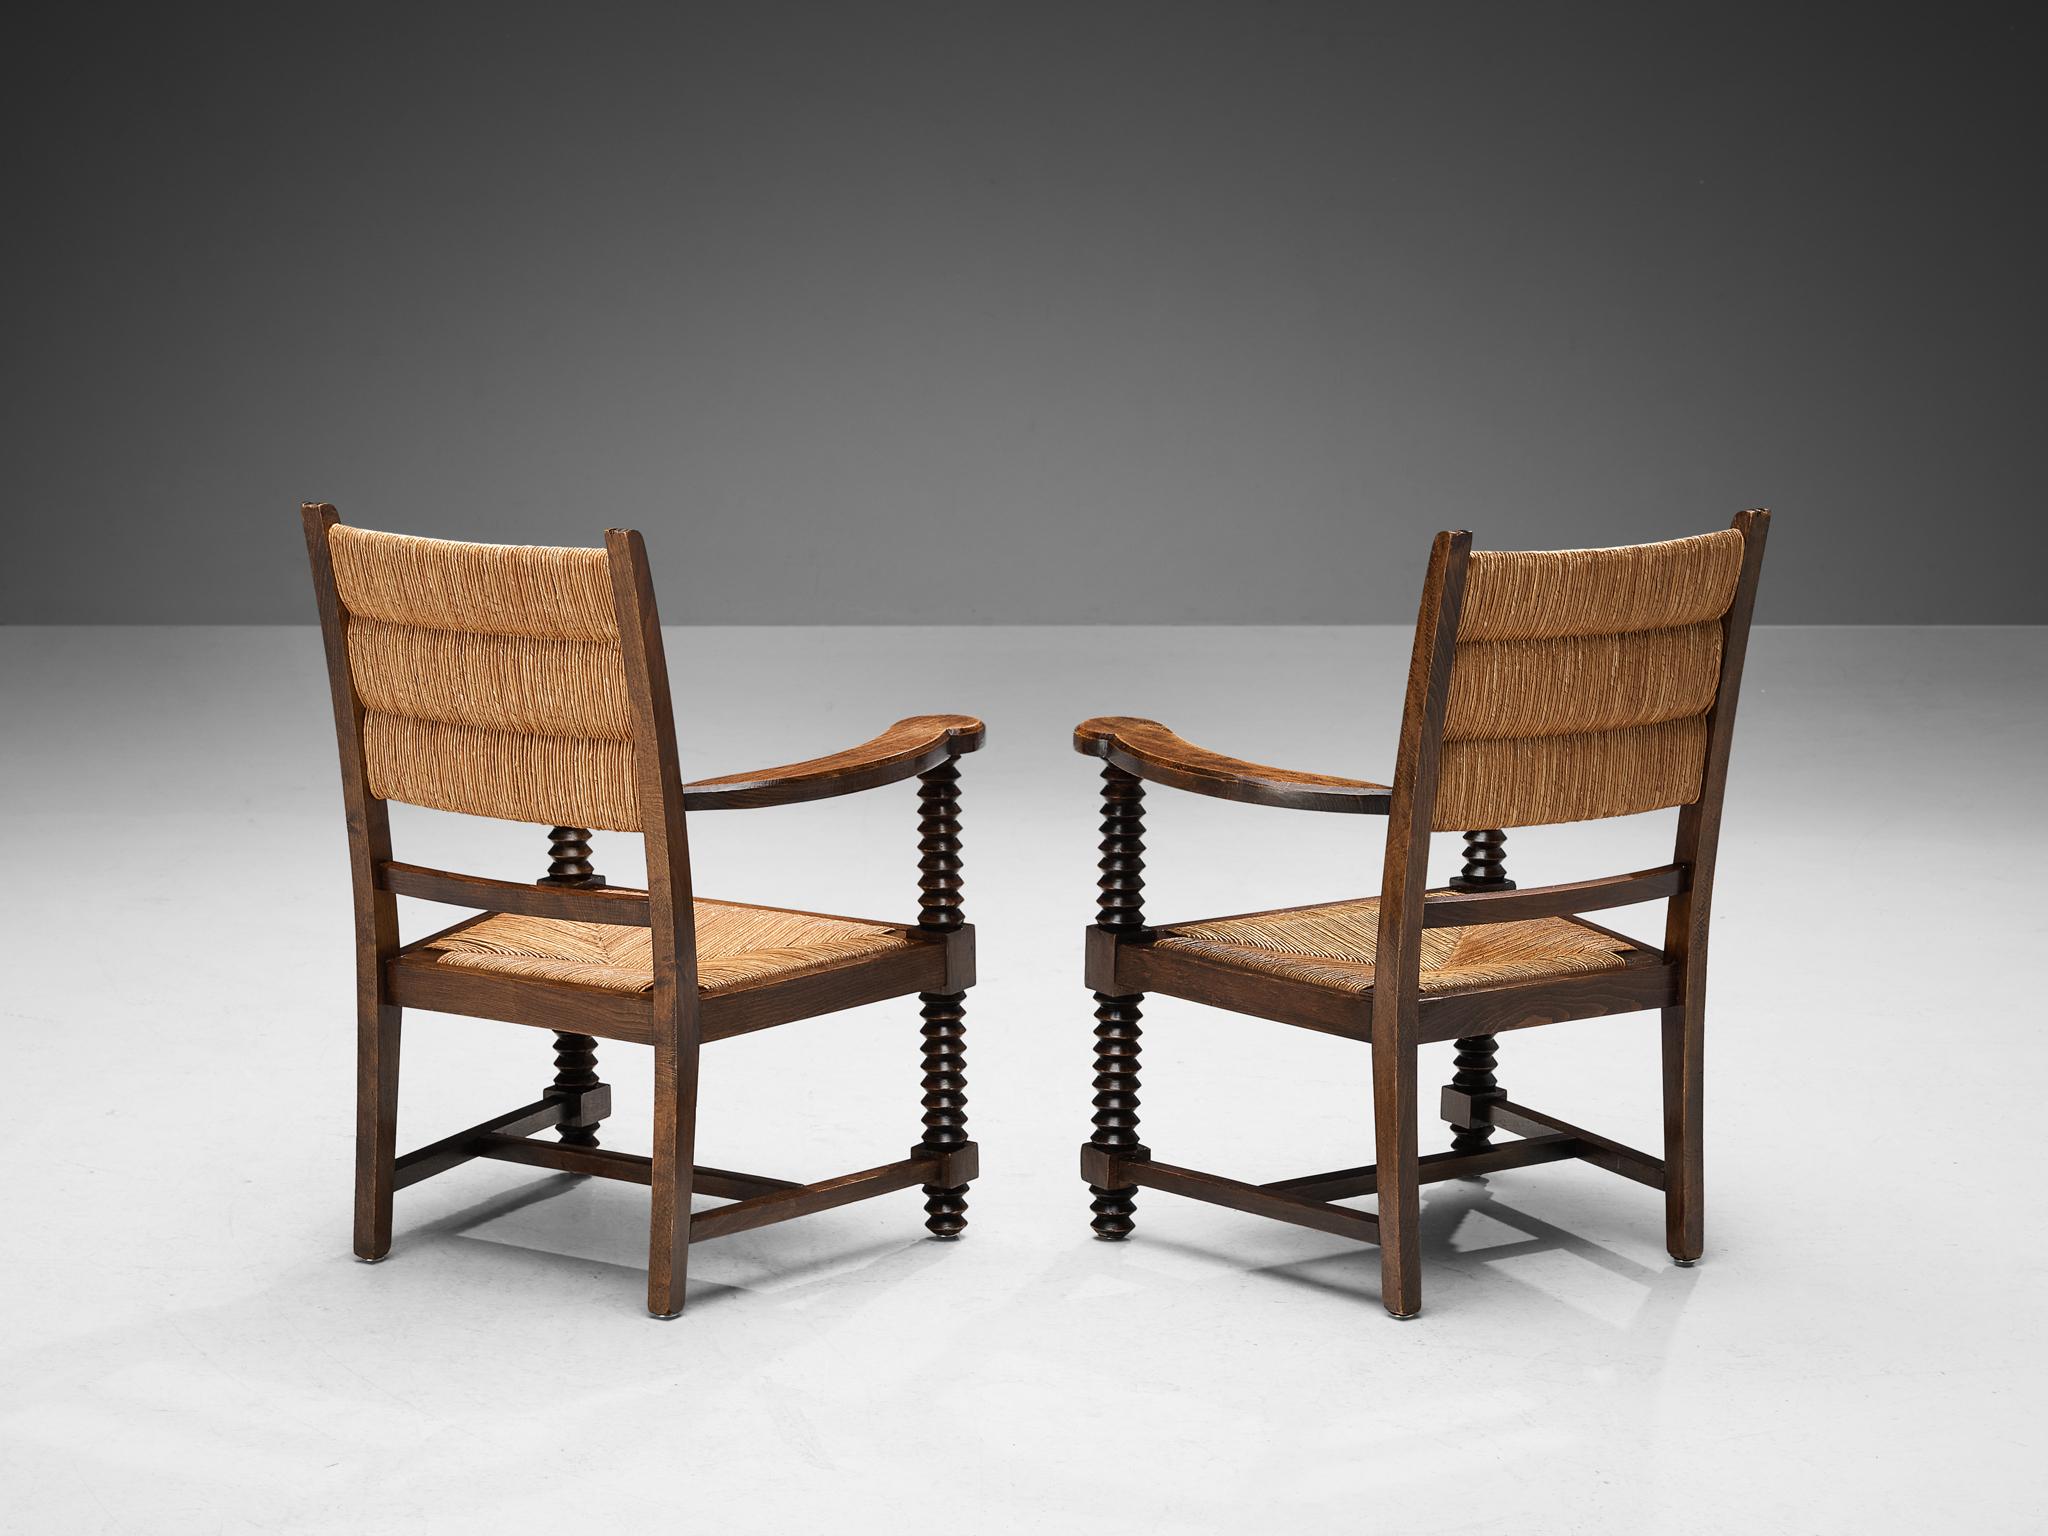 Pair of lounge chairs, straw, stained wood, France, 1940s

This piece of furniture embodies an evolved provincial character with great quality of elegance. The sincere construction and type of upholstery, give the chair a character of its own. The